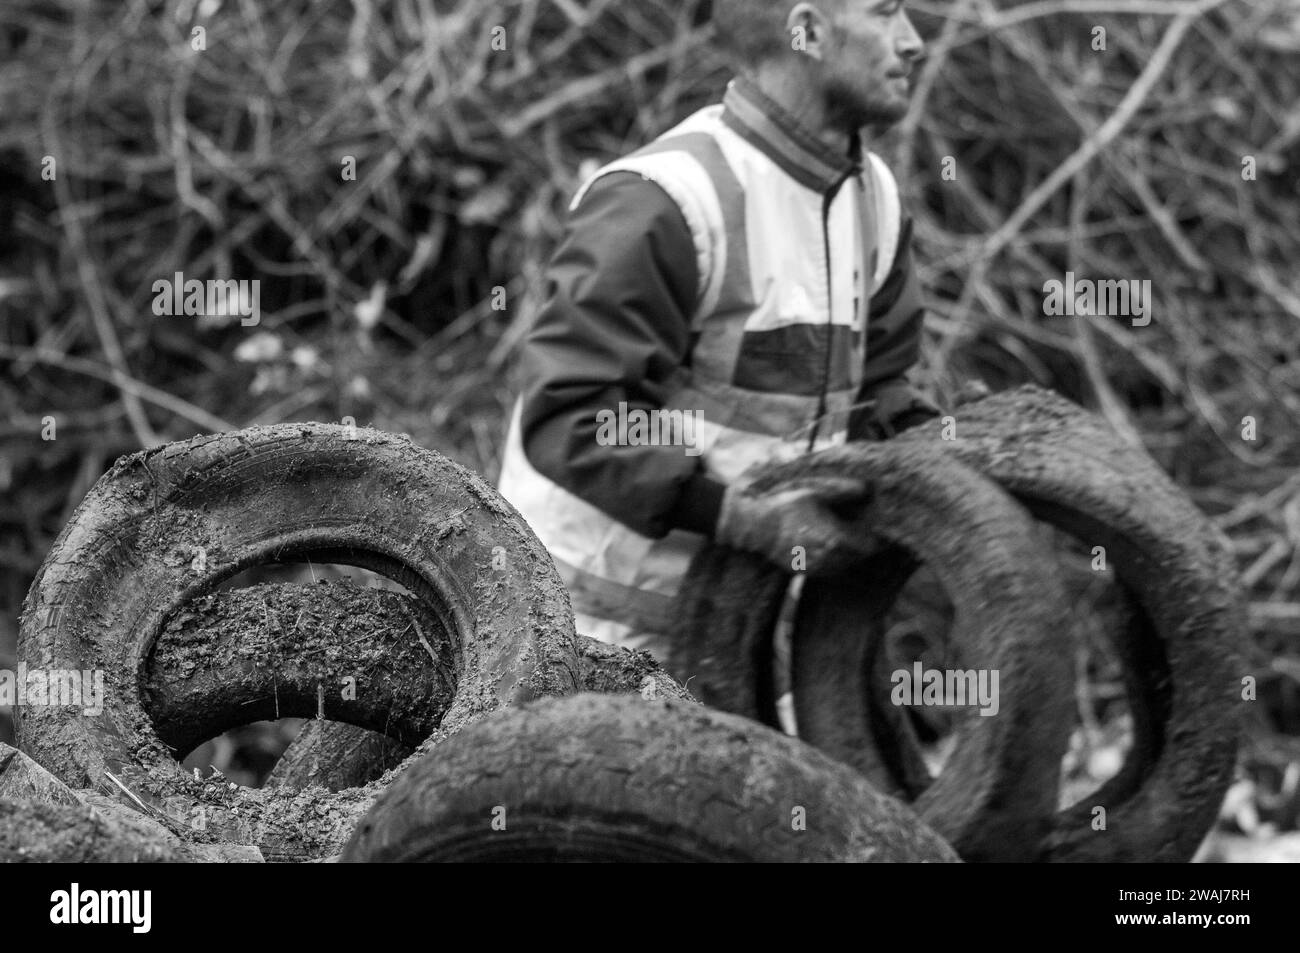 Worker clearing dumped tyres and manure after farmers protest,Quai Eugène Cavaignac, Cahors, Lot department, France Stock Photo